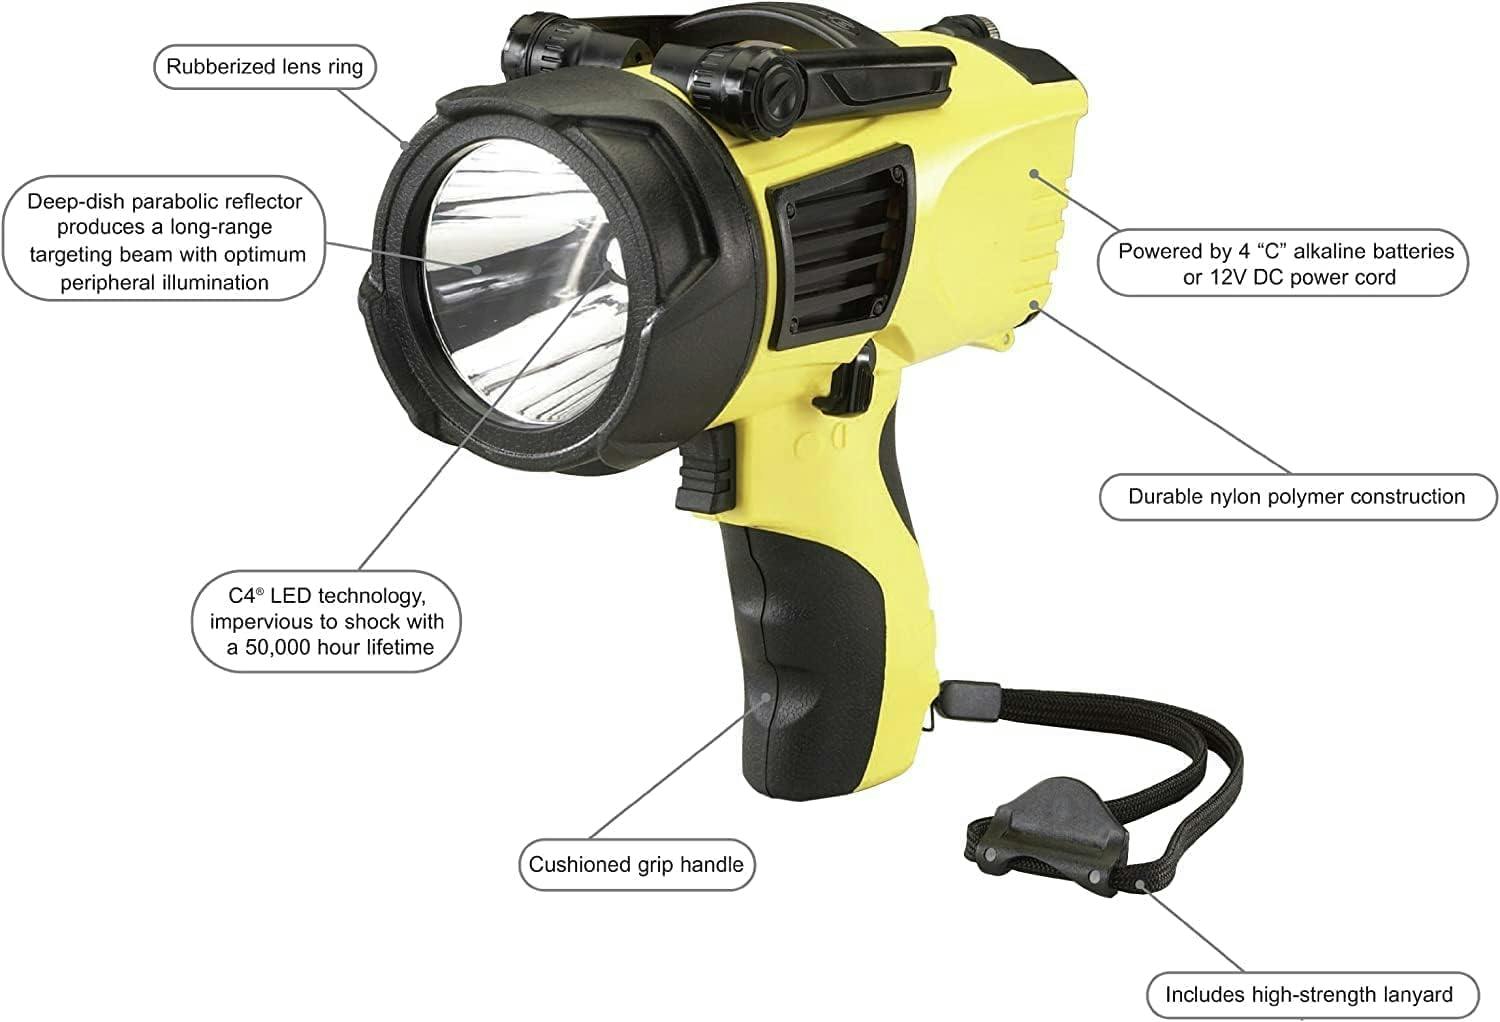 Black High-Impact Polycarbonate LED Tactical Spotlight with Hands-Free Stand